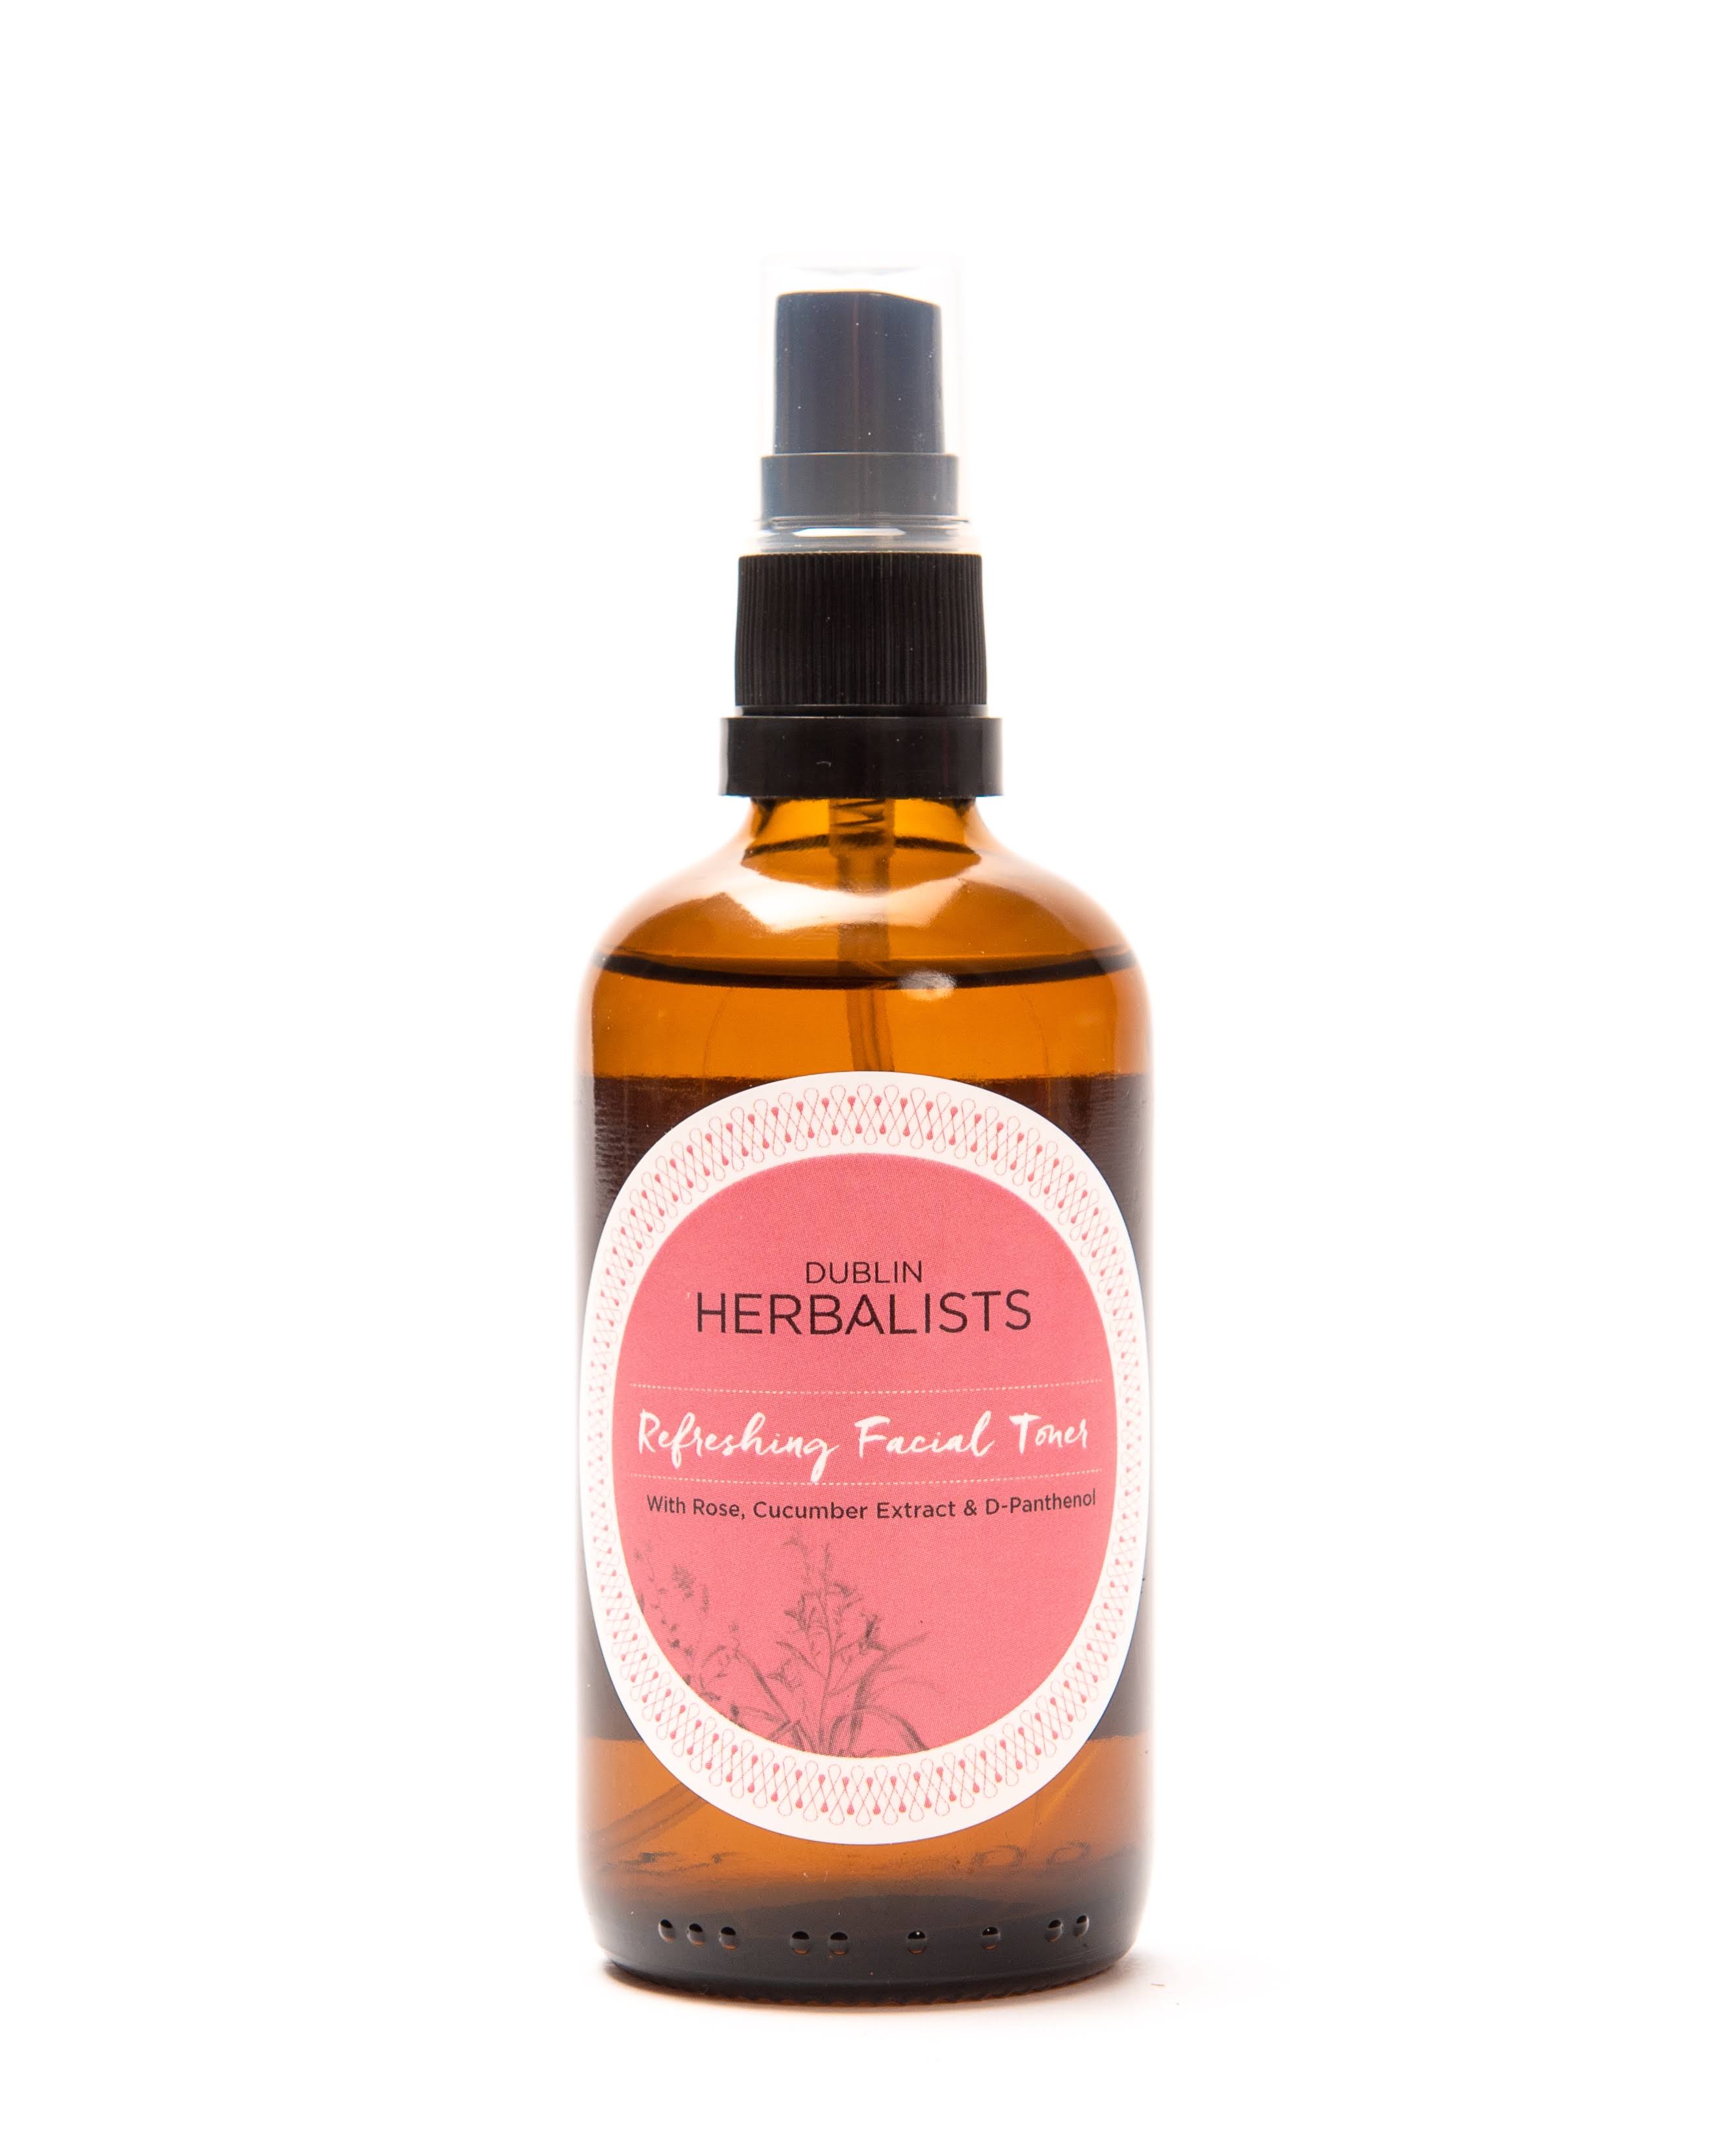 Dublin Herbalists Refreshing Facial Toner with Rose and Cucumber Extract